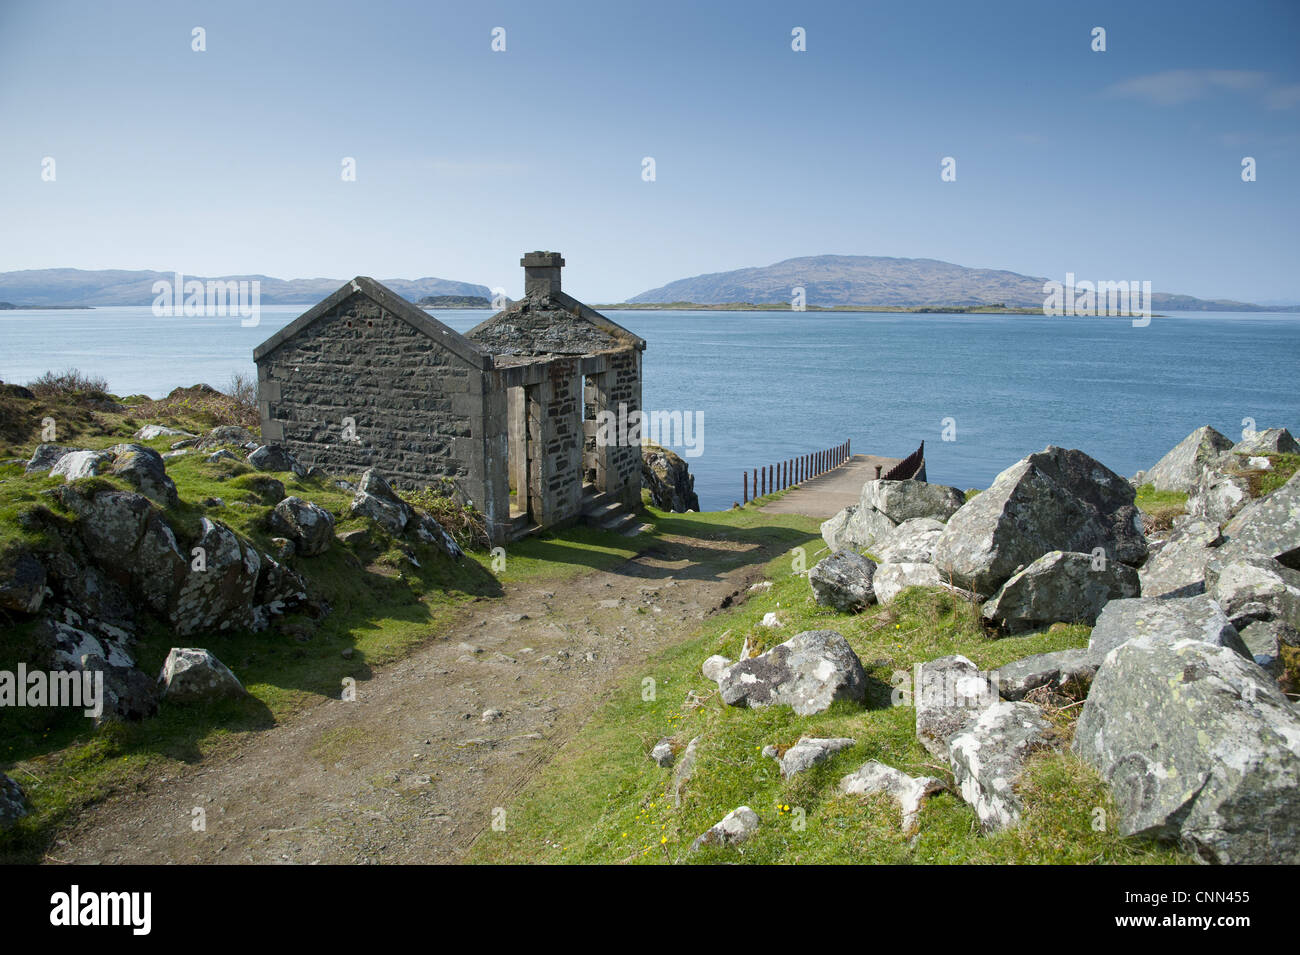 View of ruined ticket office, pier and coastline, Craignish, Argyll and Bute, Scotland, april Stock Photo